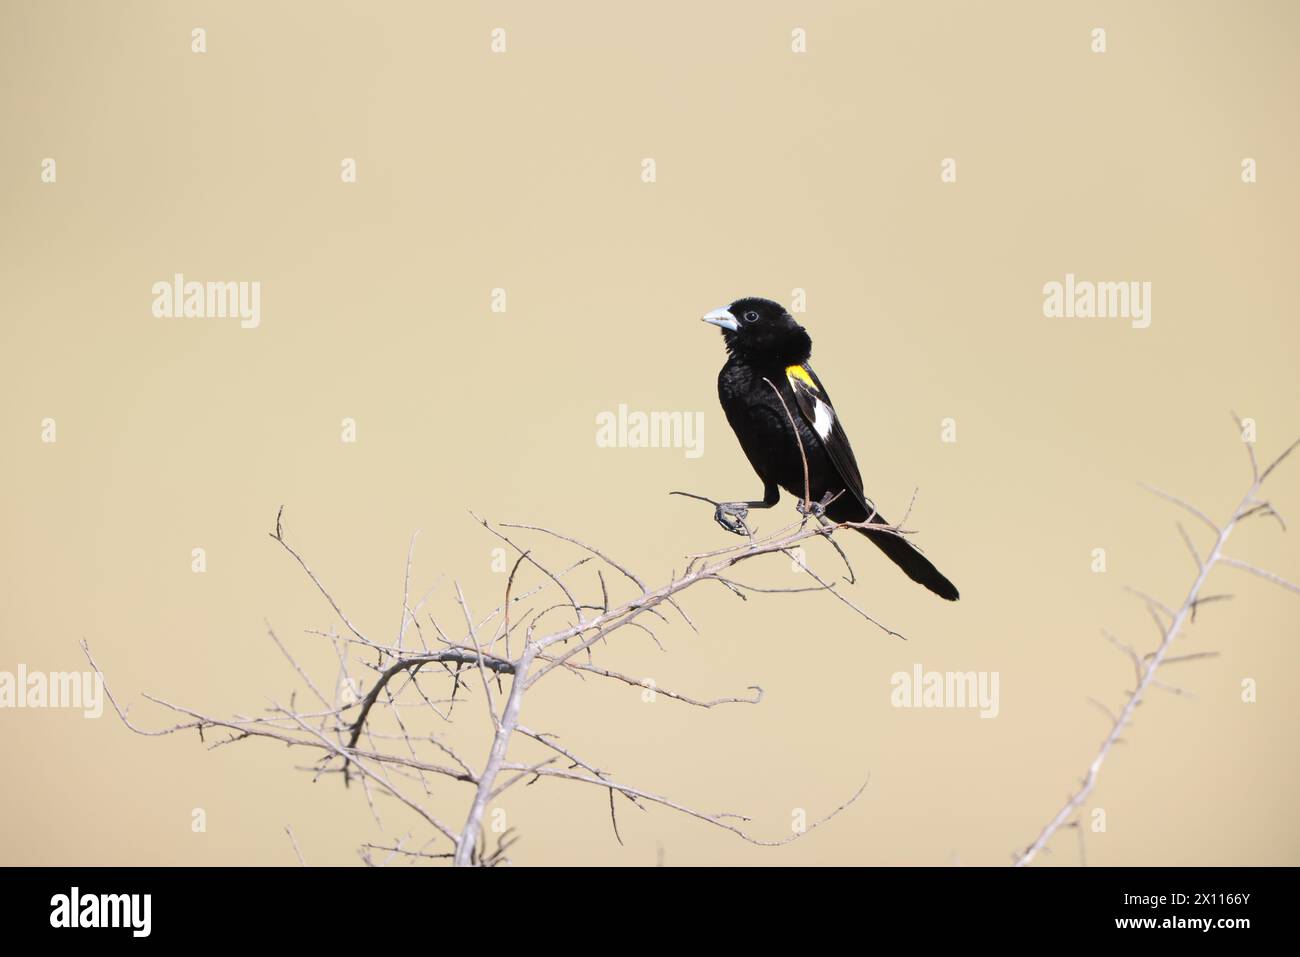 White-winged widowbird (Euplectes albonotatus) is a species of passerine bird in the family Ploceidae native to Africa south of the Sahara. Stock Photo